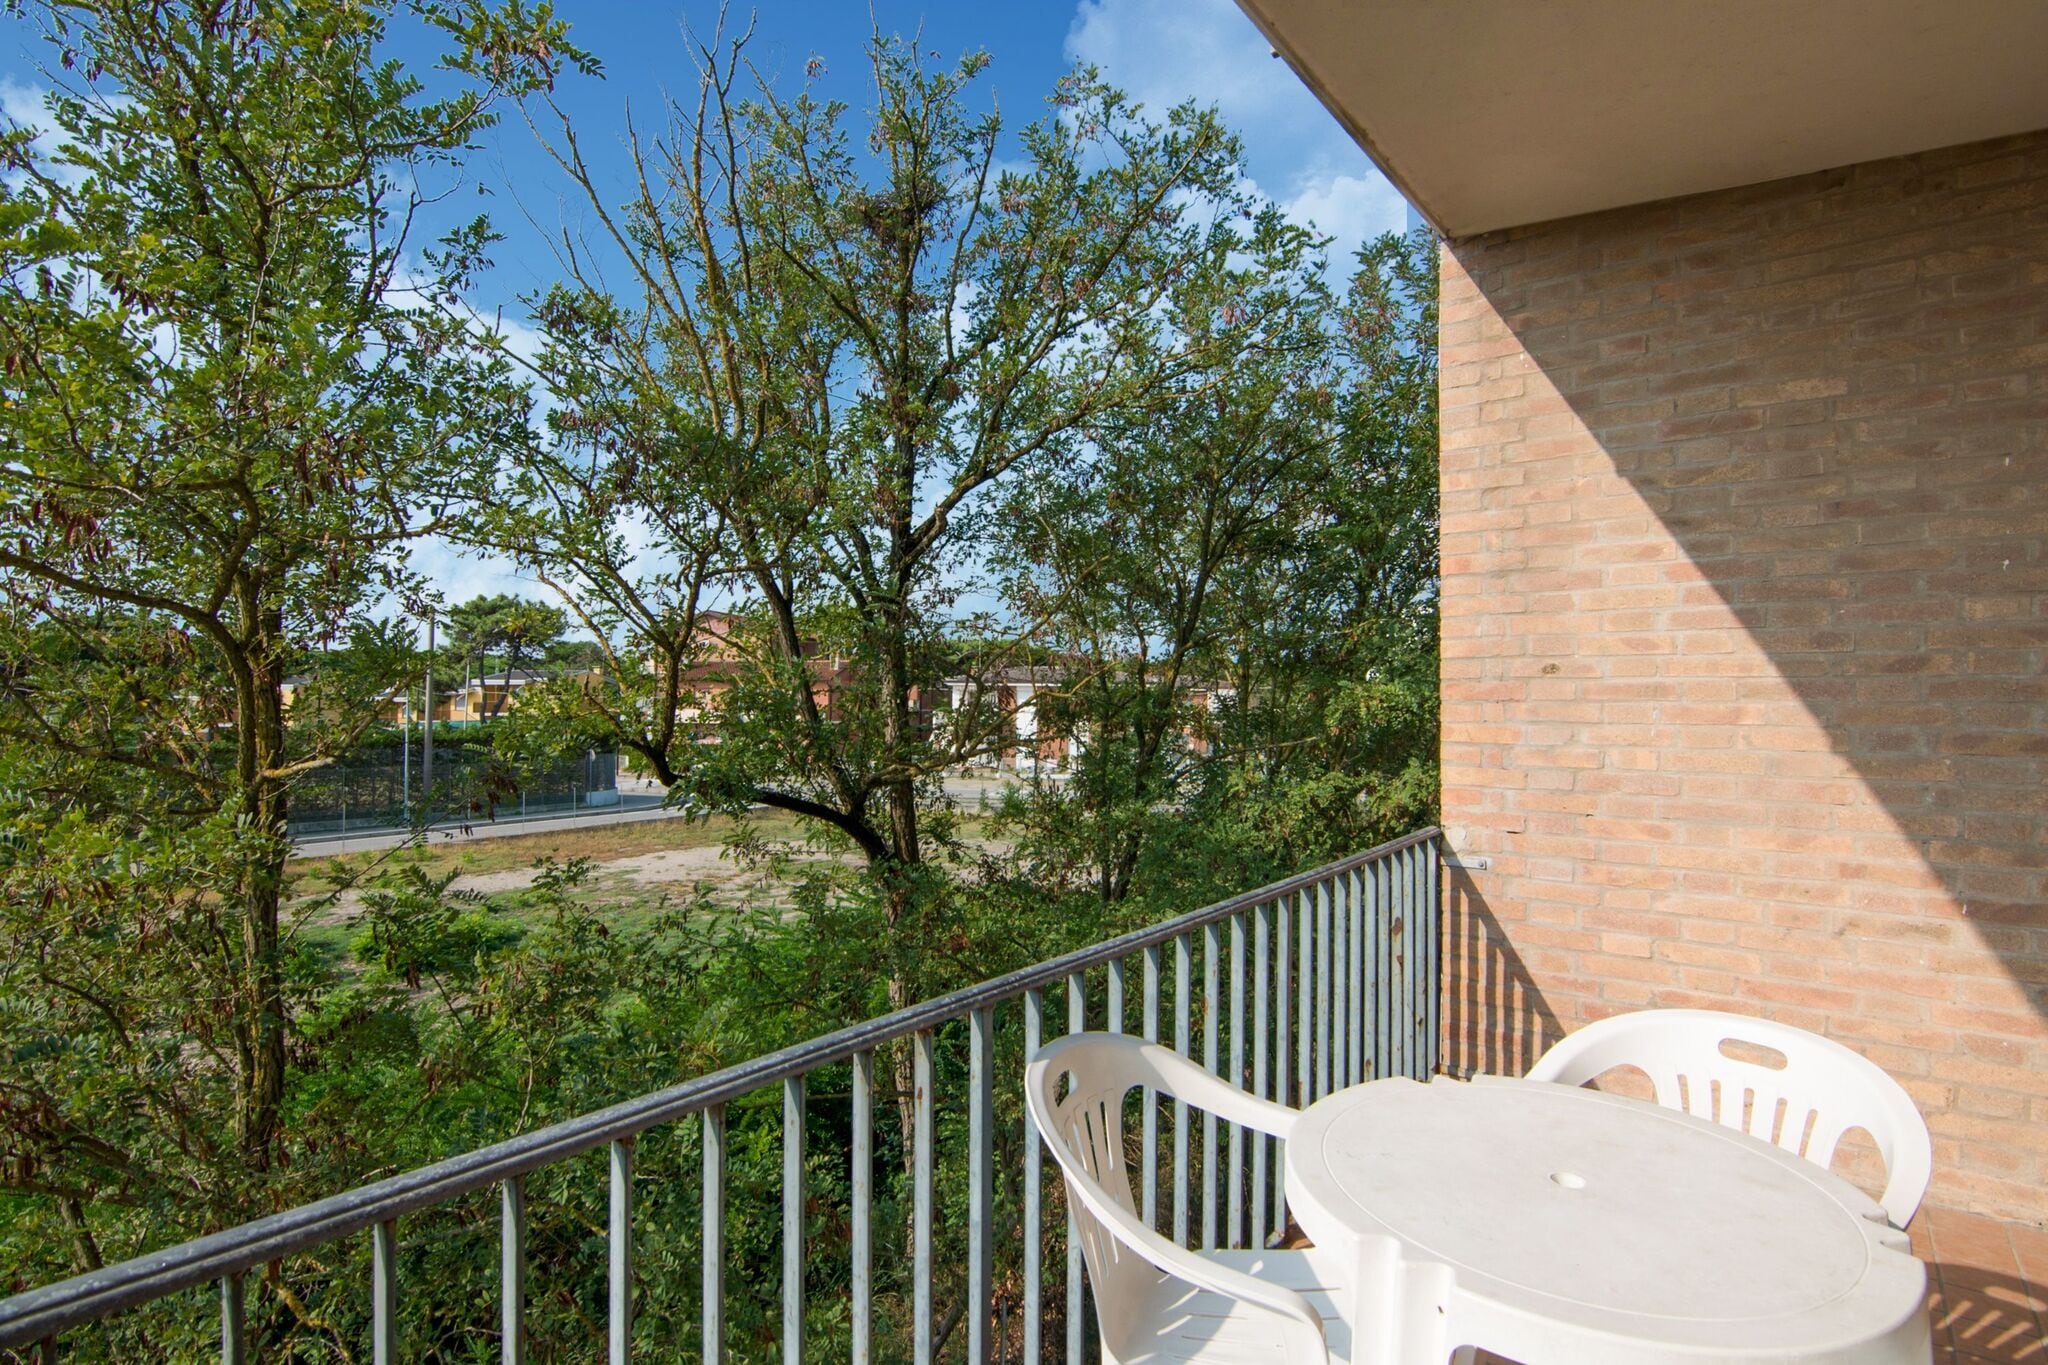 Charmant appartement in Rosolina Mare met terras